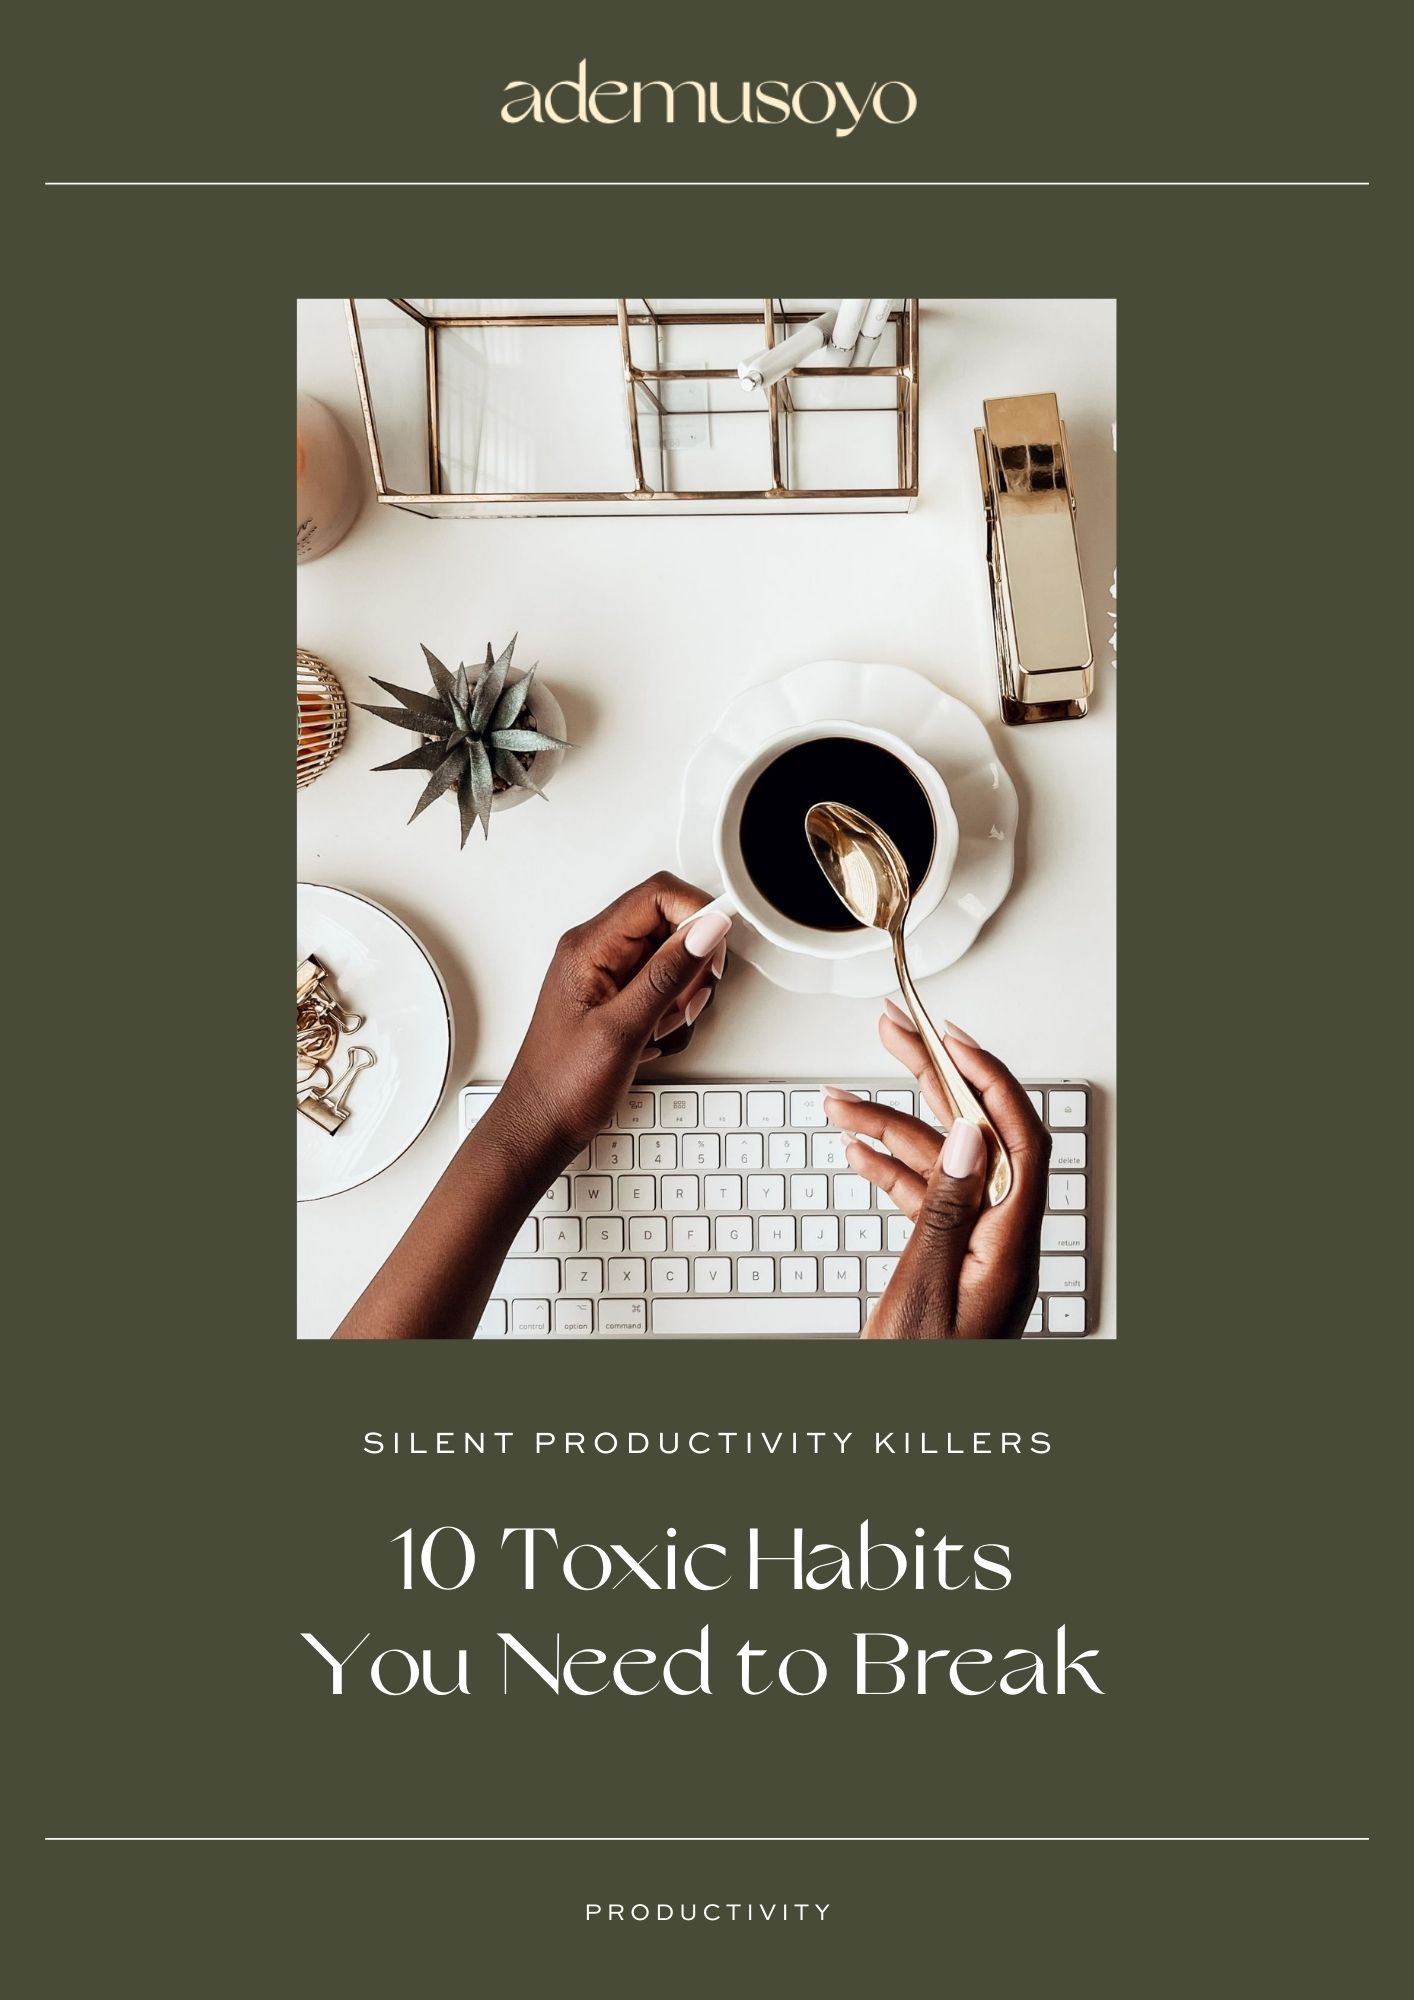 Uncover the biggest productivity killers in the workplace. Learn how to eliminate these toxic habits for a more productive day!